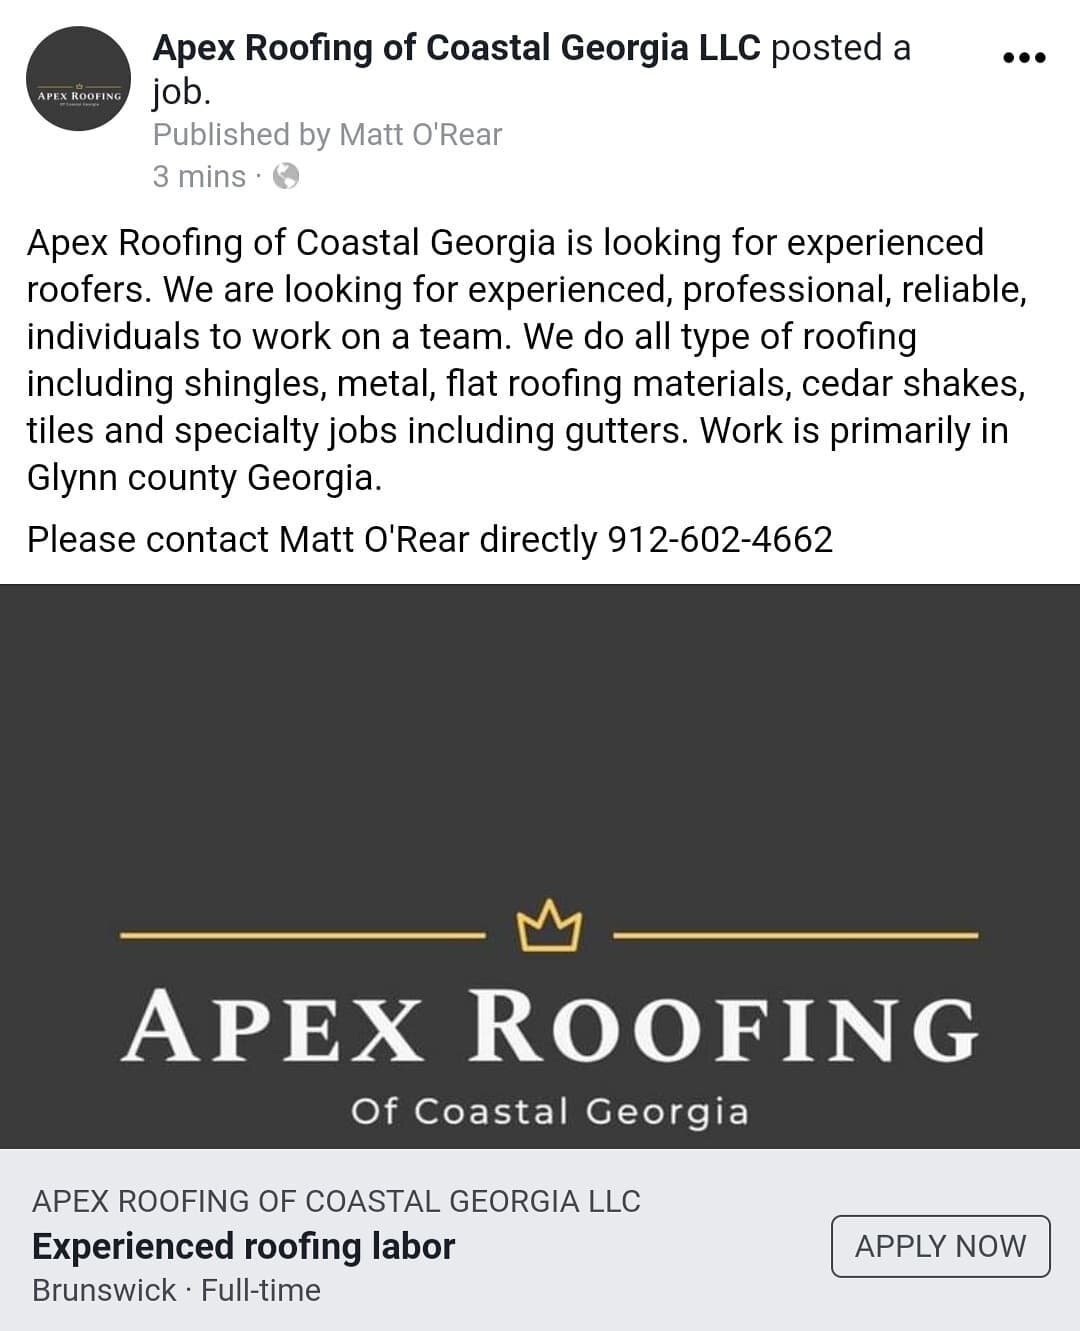 We are hiring for experienced roofing laborers. Please call Matt 912-602-4662